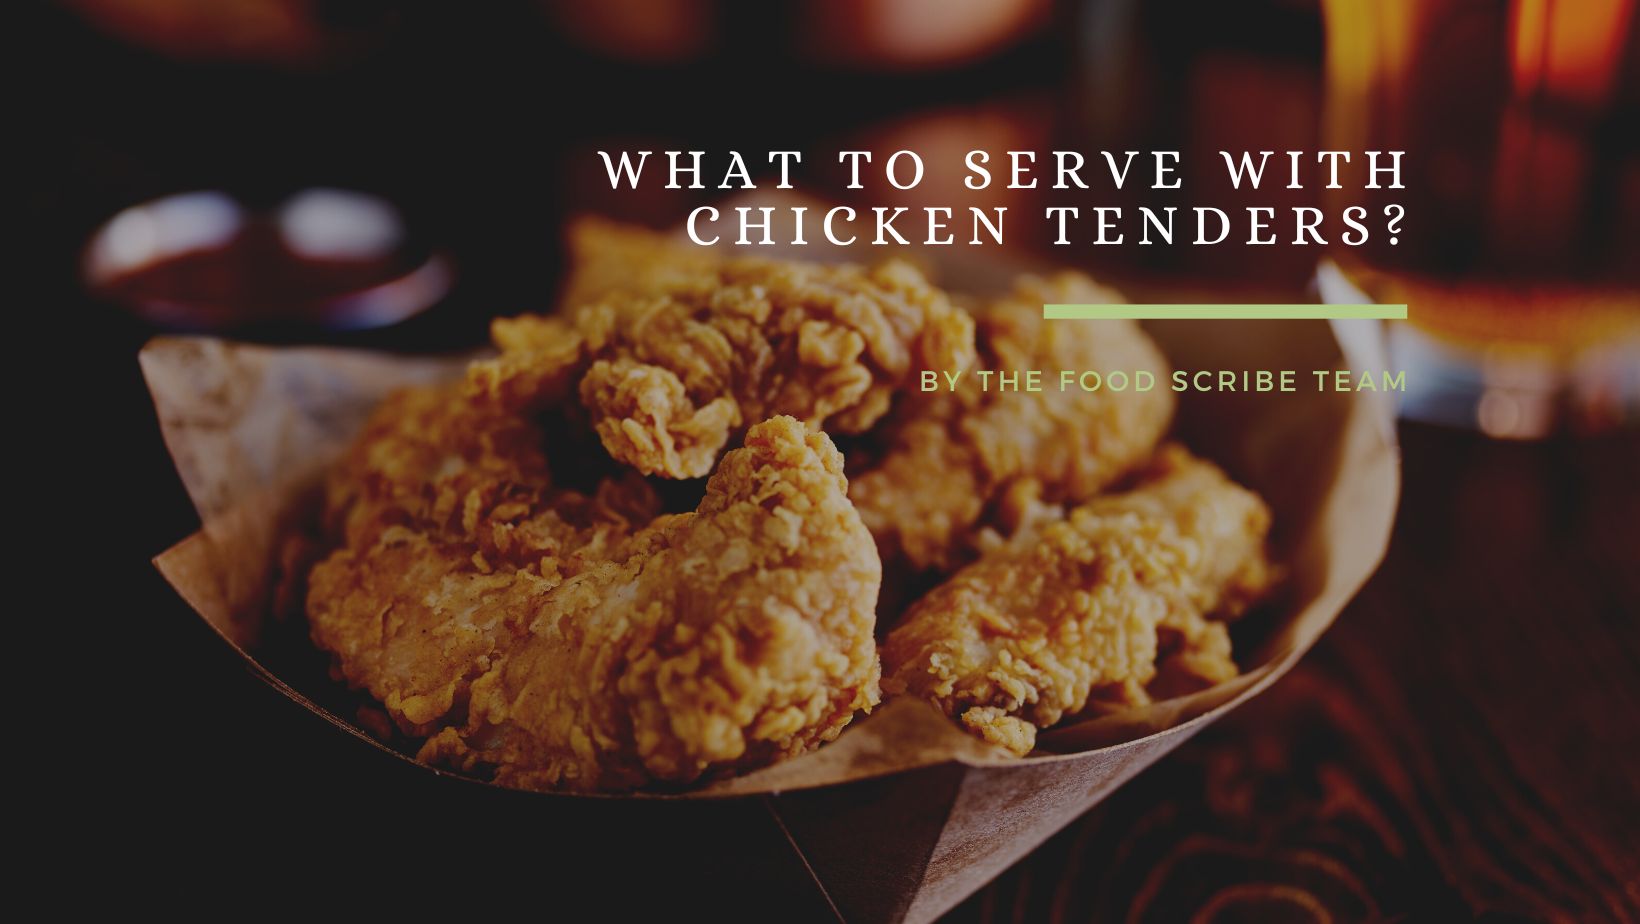 What to Serve with Chicken Tenders?